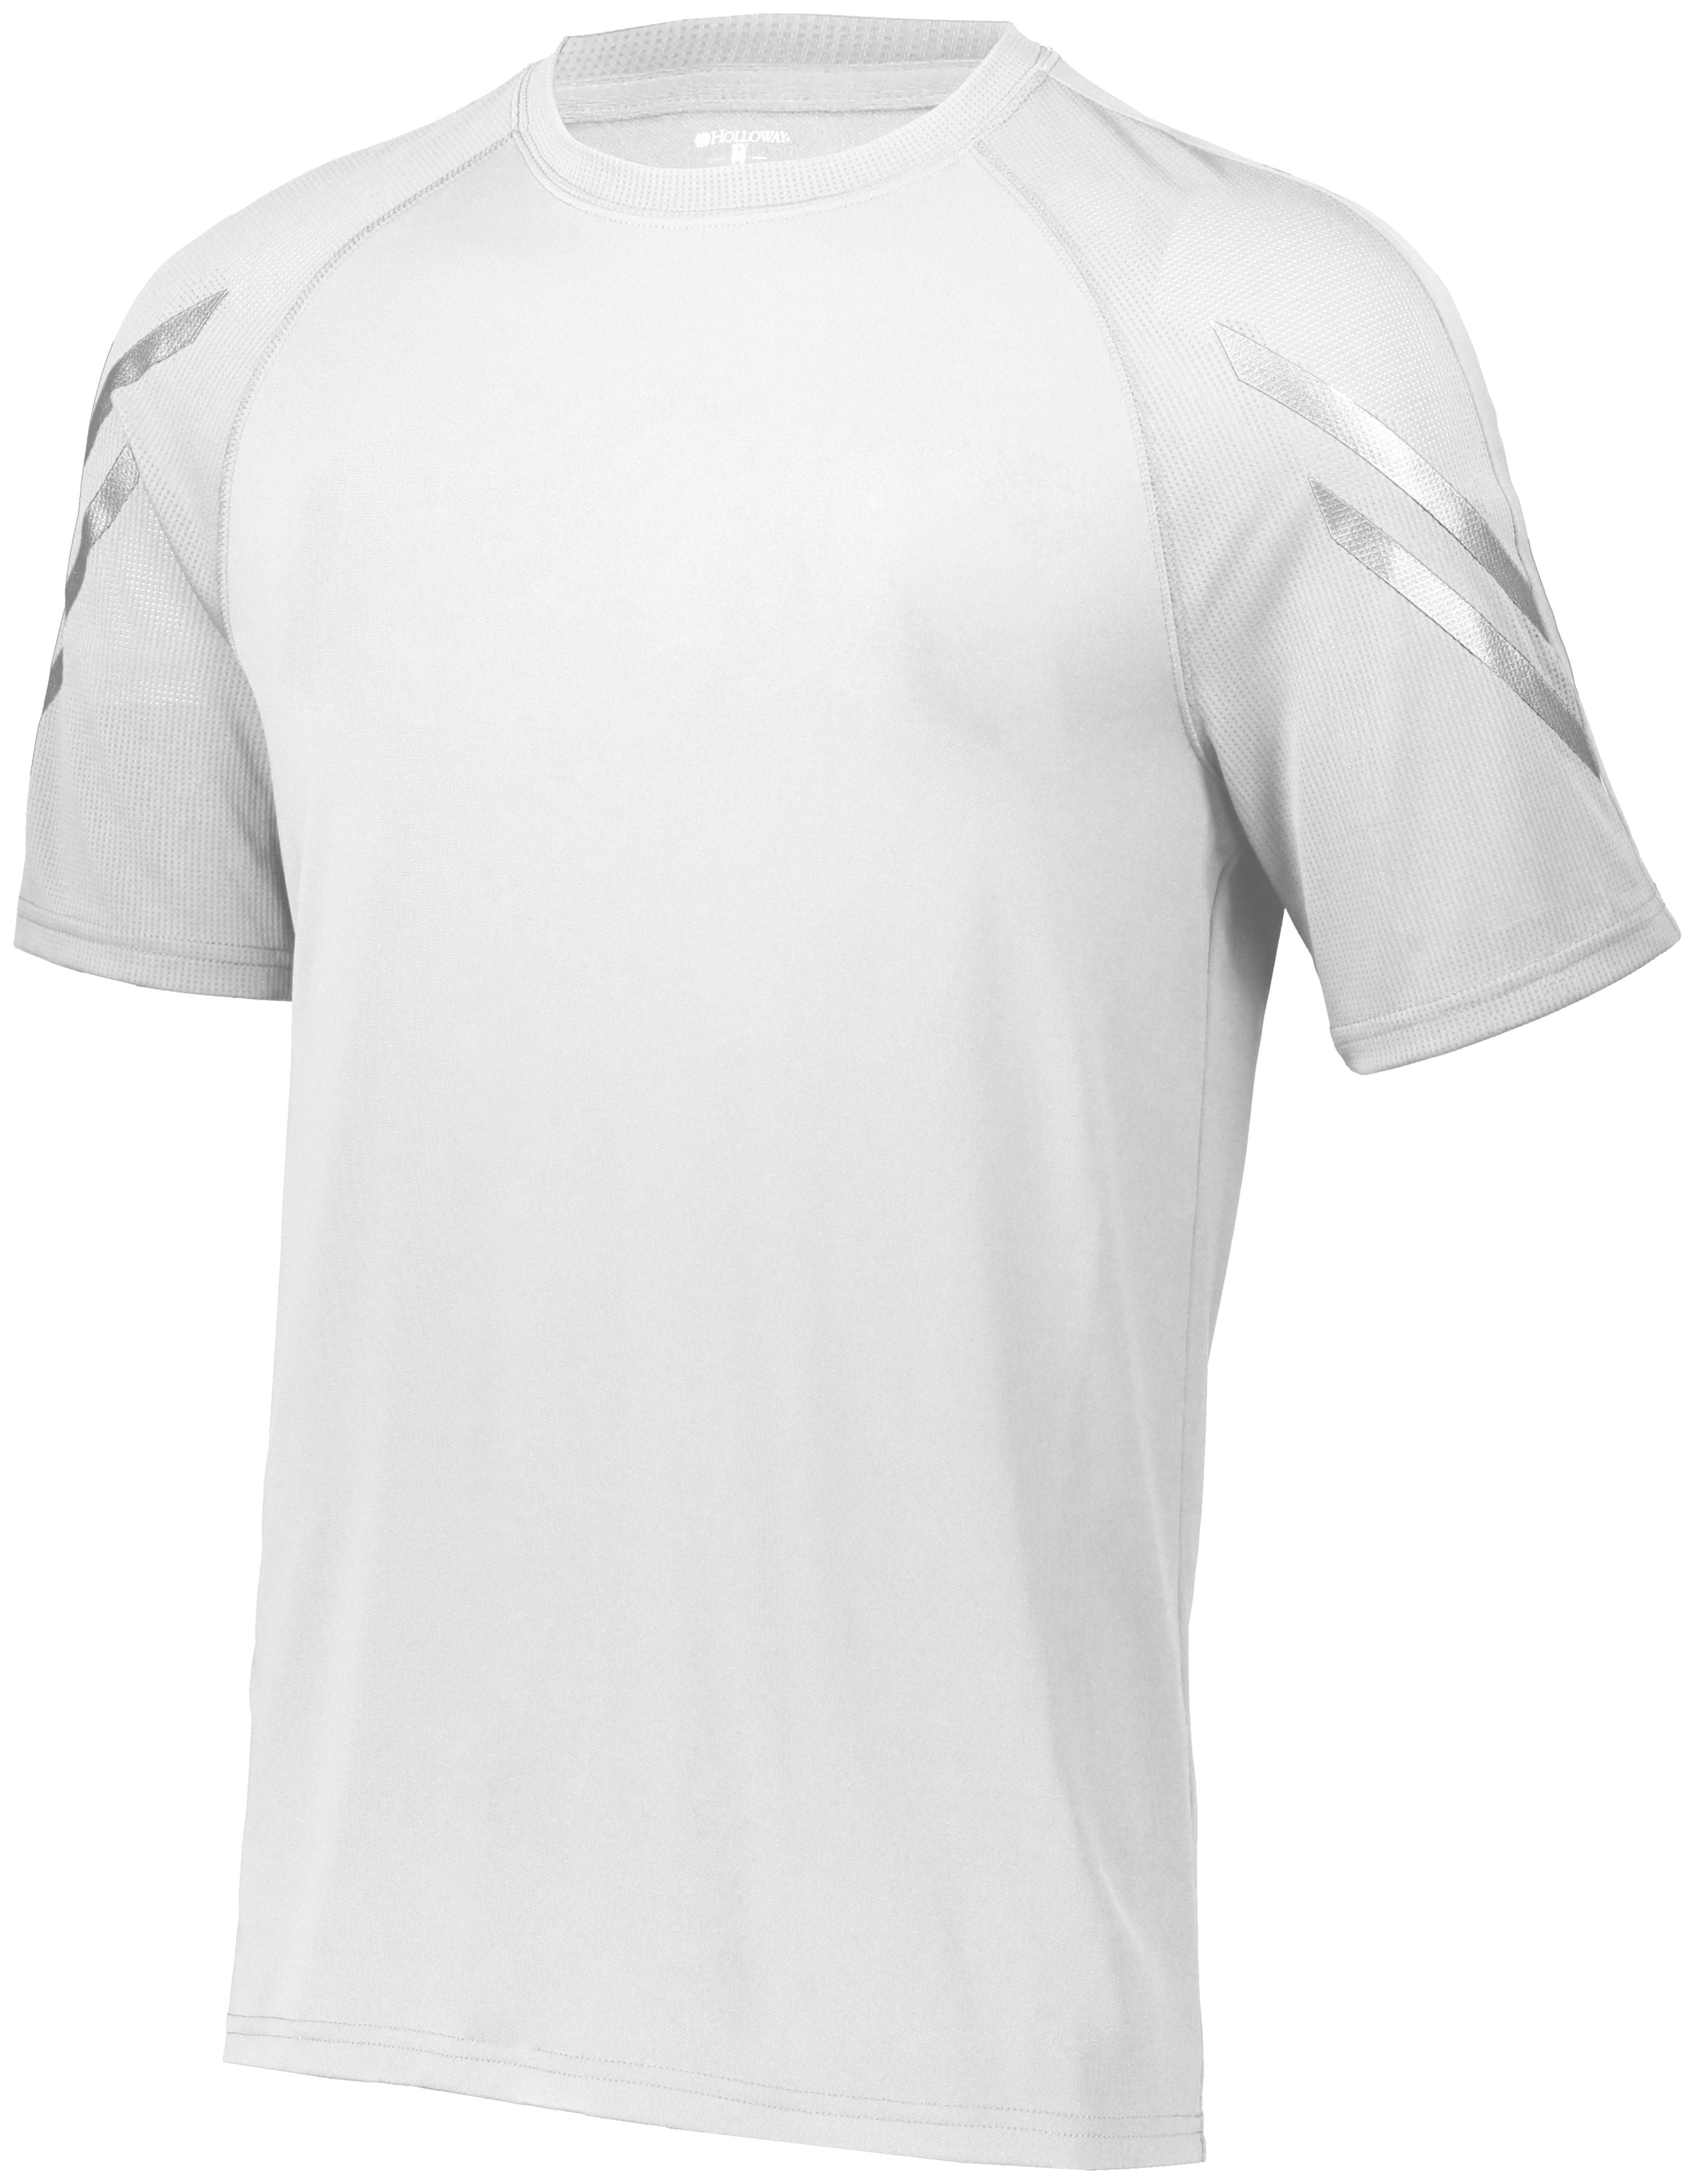 Holloway Flux Shirt Short Sleeve in White  -Part of the Adult, Holloway, Shirts, Flux-Collection product lines at KanaleyCreations.com